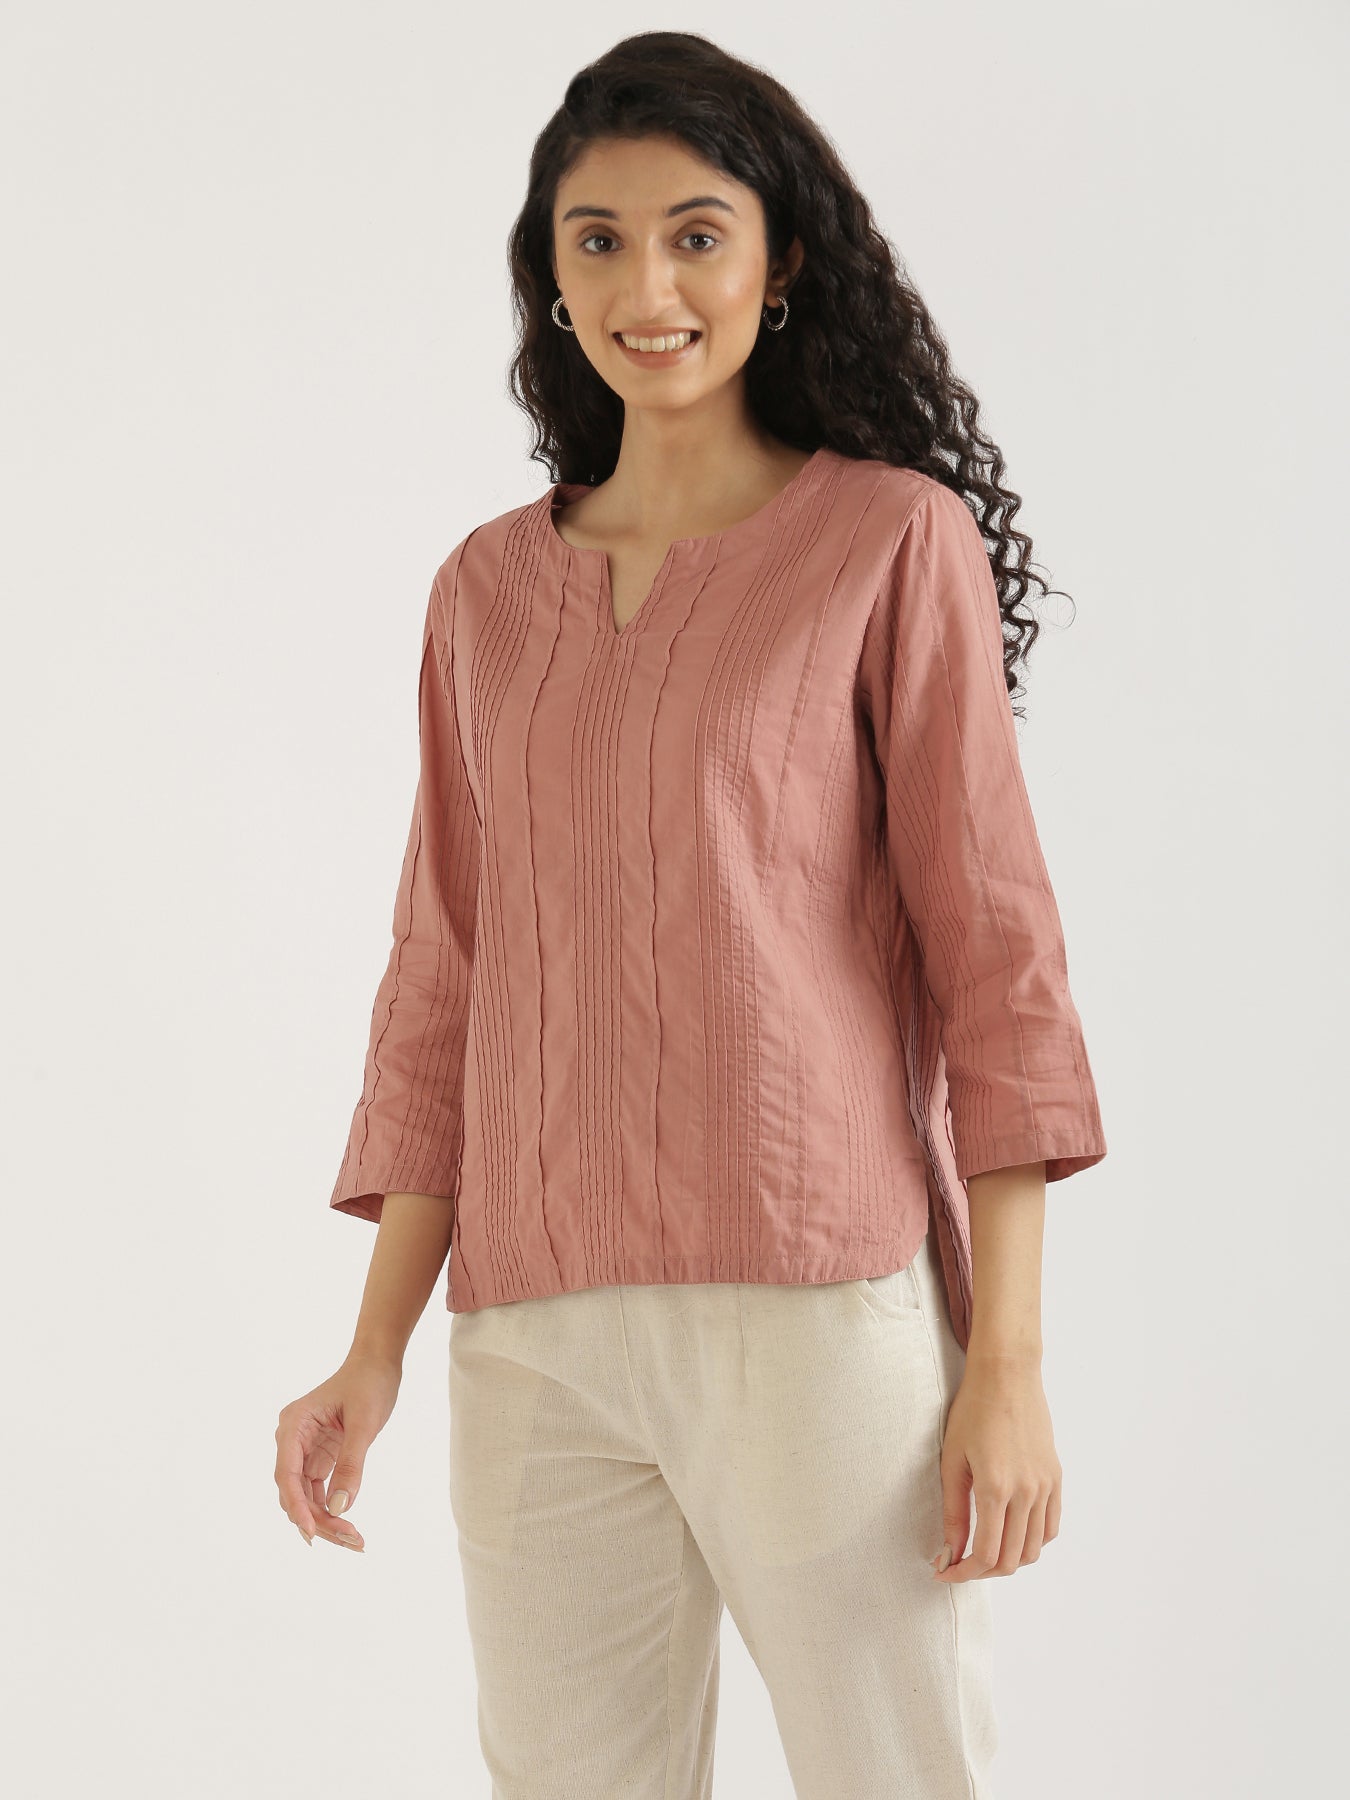 Rose Taupe Everyday Cotton Top